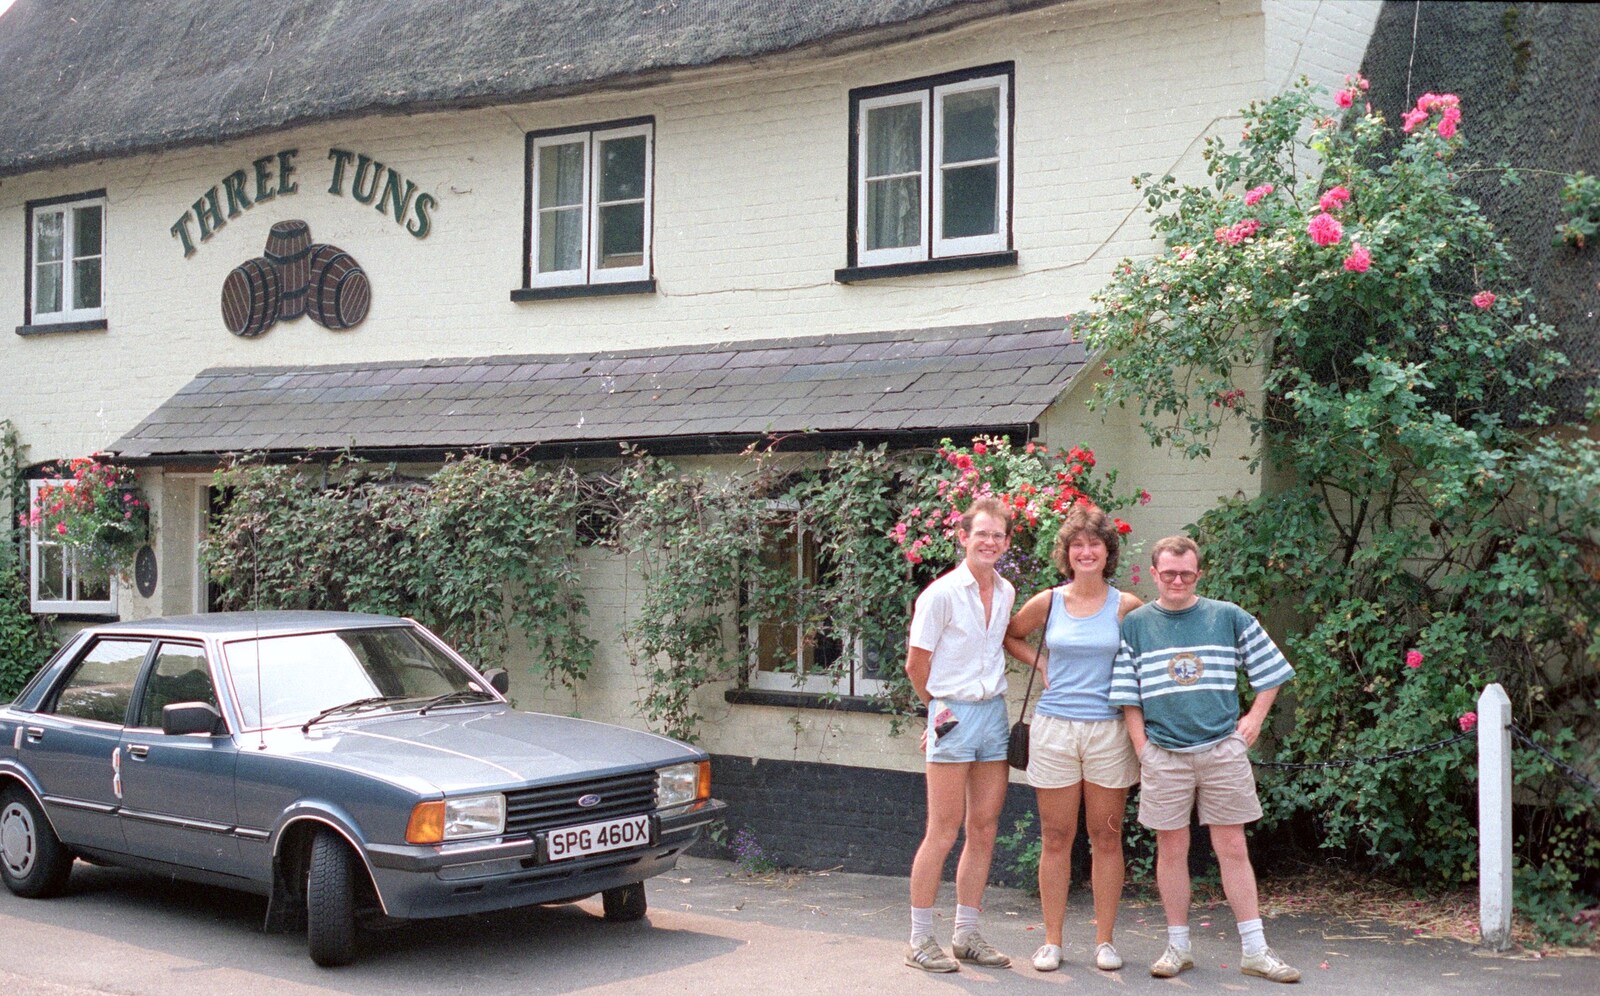 Outside the pub with a 1982 Ford Cortina from Back From Uni: Summer Pruning, Bransgore, Dorset - 25th July 1989